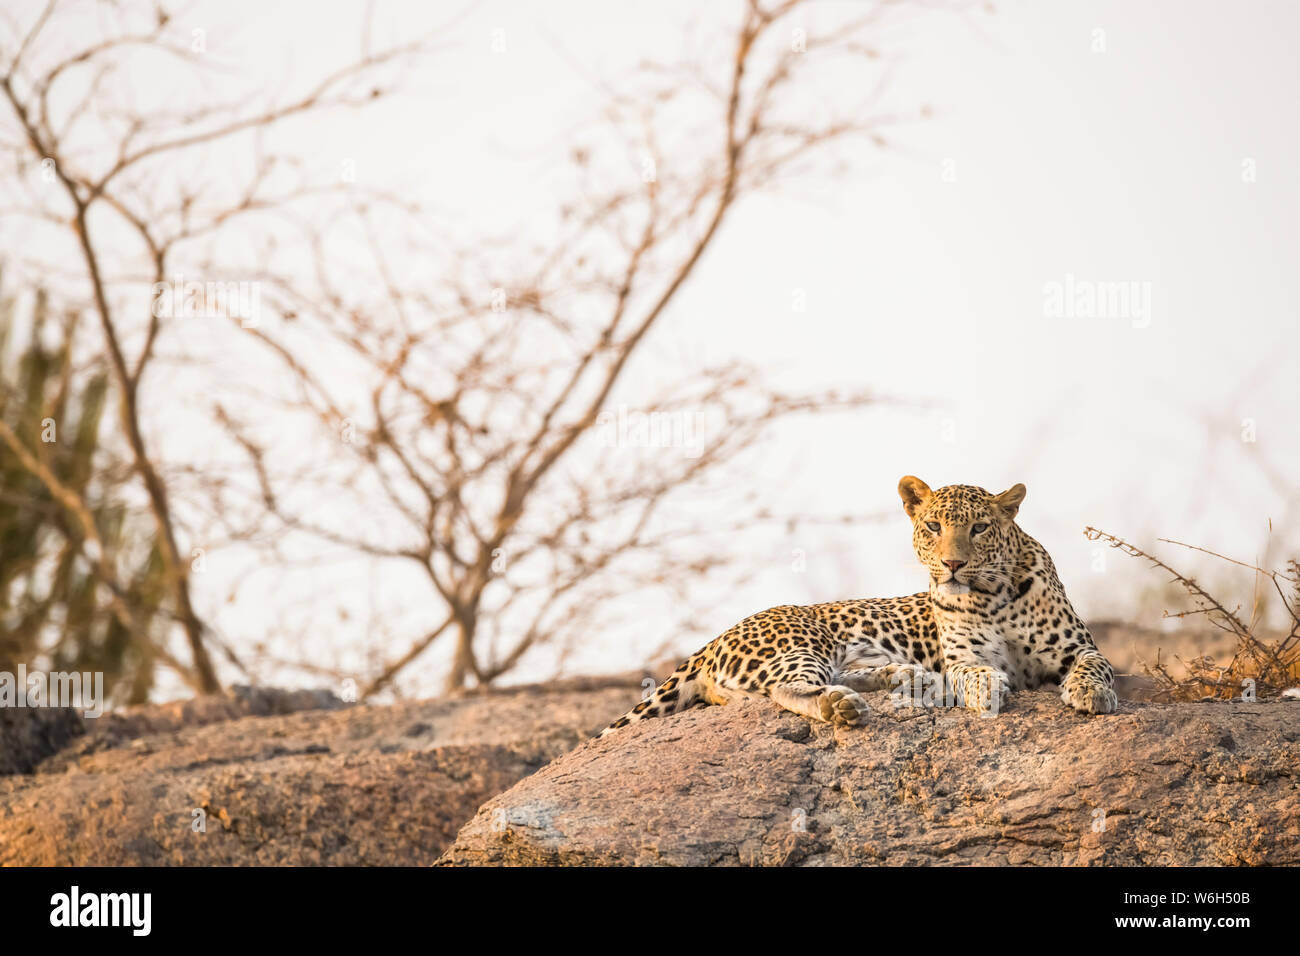 Leopard (Panthera pardus) resting on a rock in the sunset light in Northern India; Rajasthan, India Stock Photo